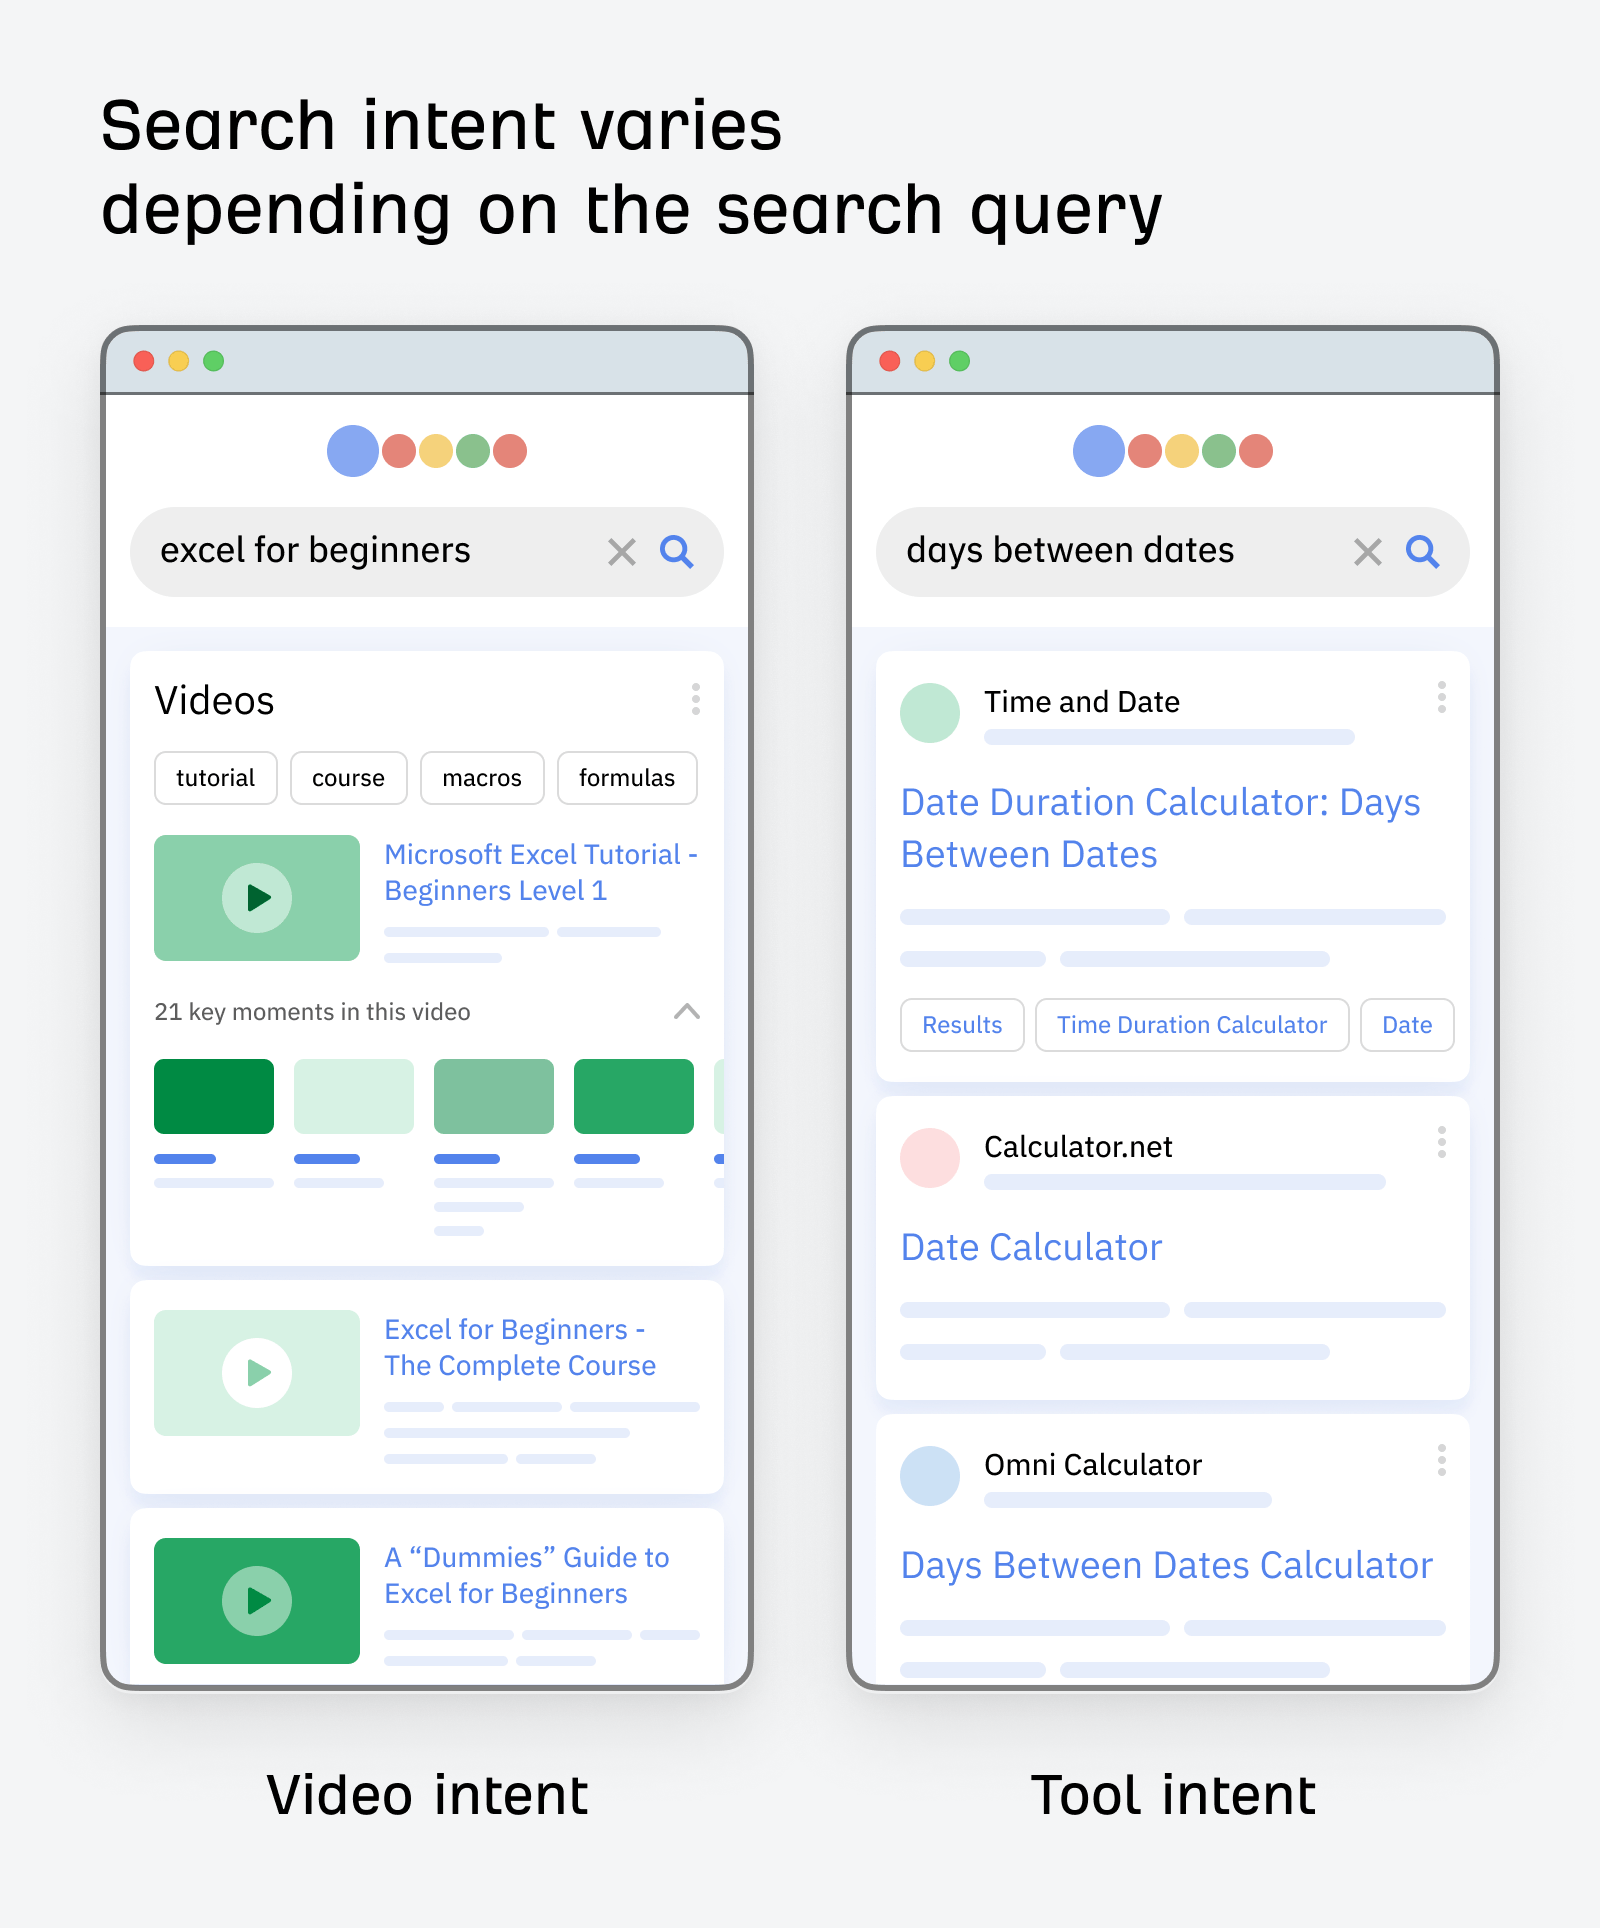 Search intent varies depending on the search query